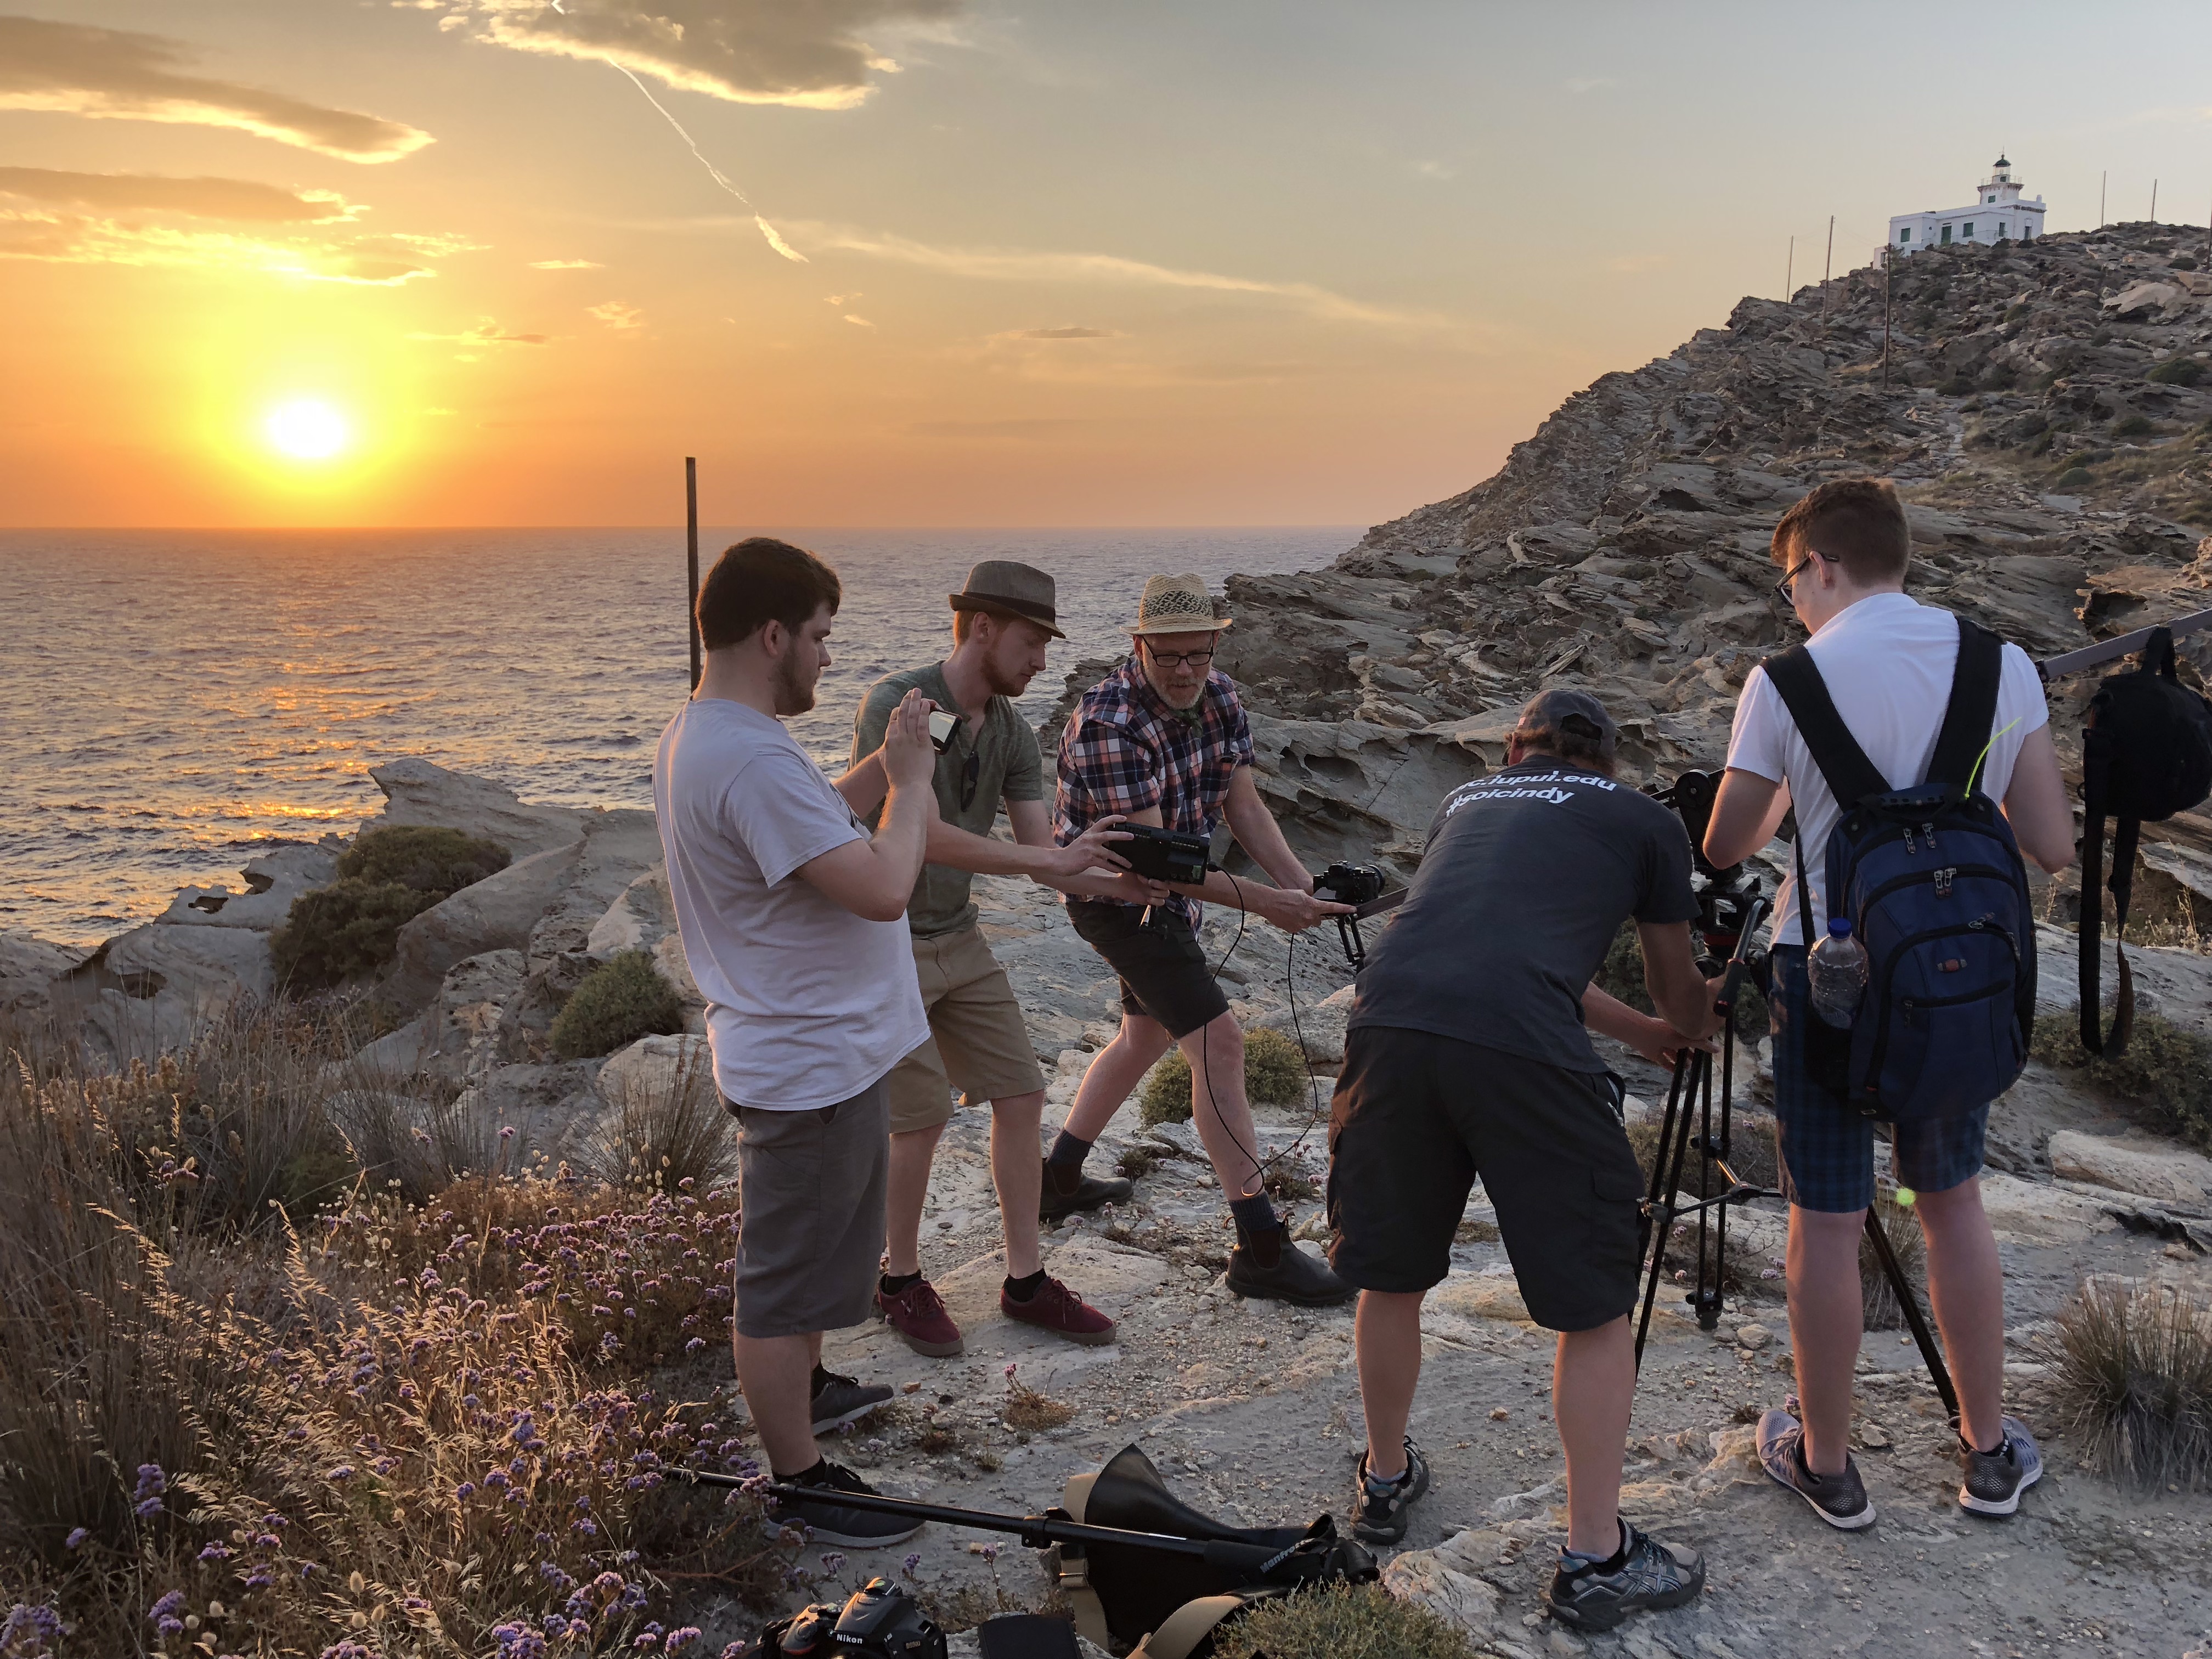 Study Abroad Photo Contest Photo, Students preparing camera for filming on rocky beach in Greece with the sun about to set in the water